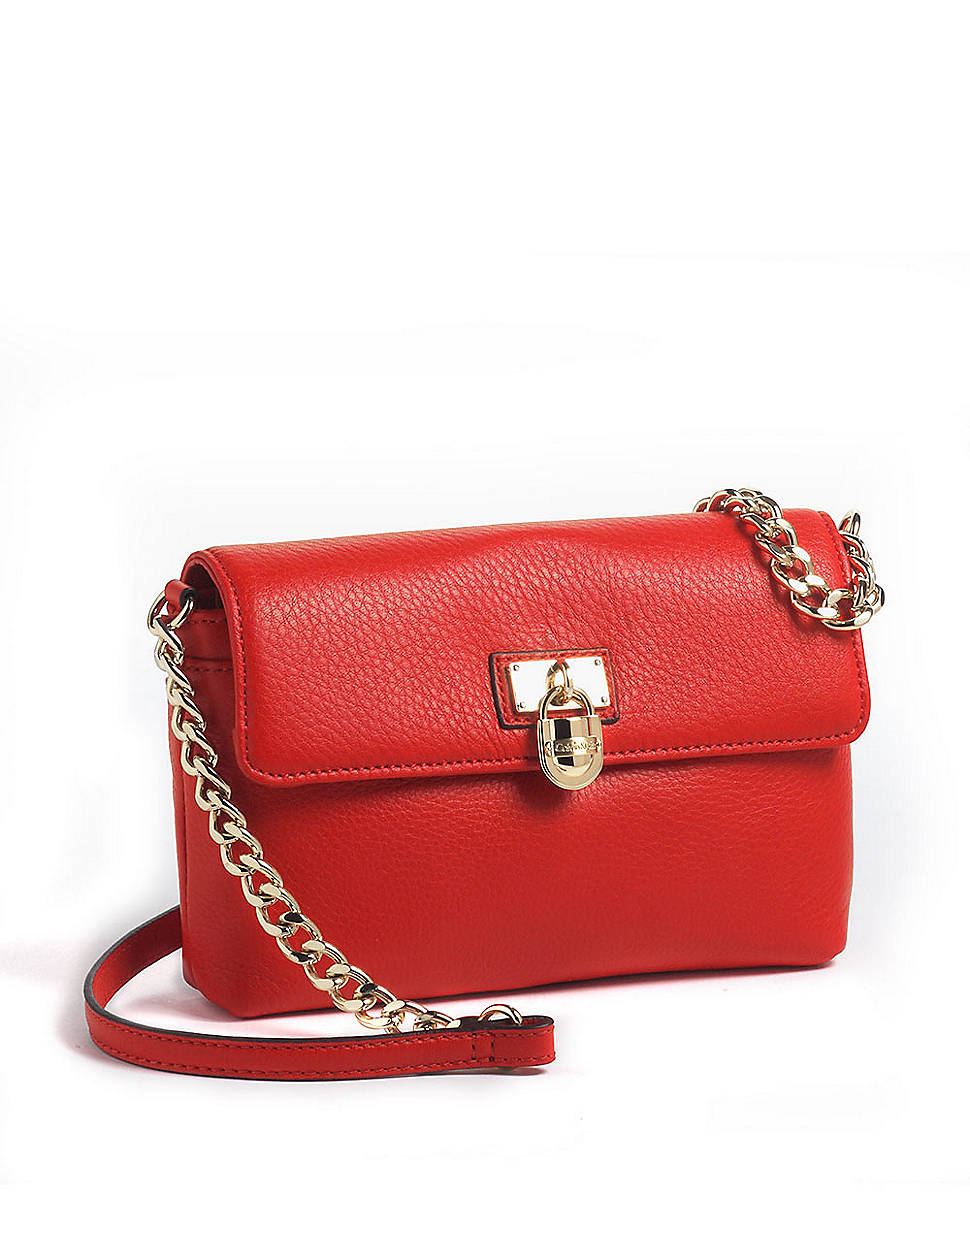 Calvin Klein Leather Crossbody Bag in Red (coral) | Lyst